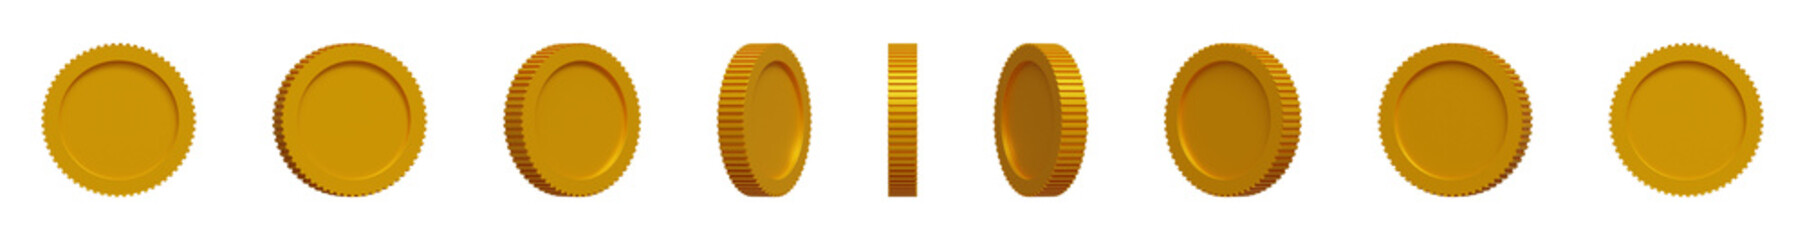 3D rotating gold coins. Money cash for gambling games, treasure, prize, finance or casino jackpot concept. Gold money set. Gold coins in different positions for animation. 3d illustration